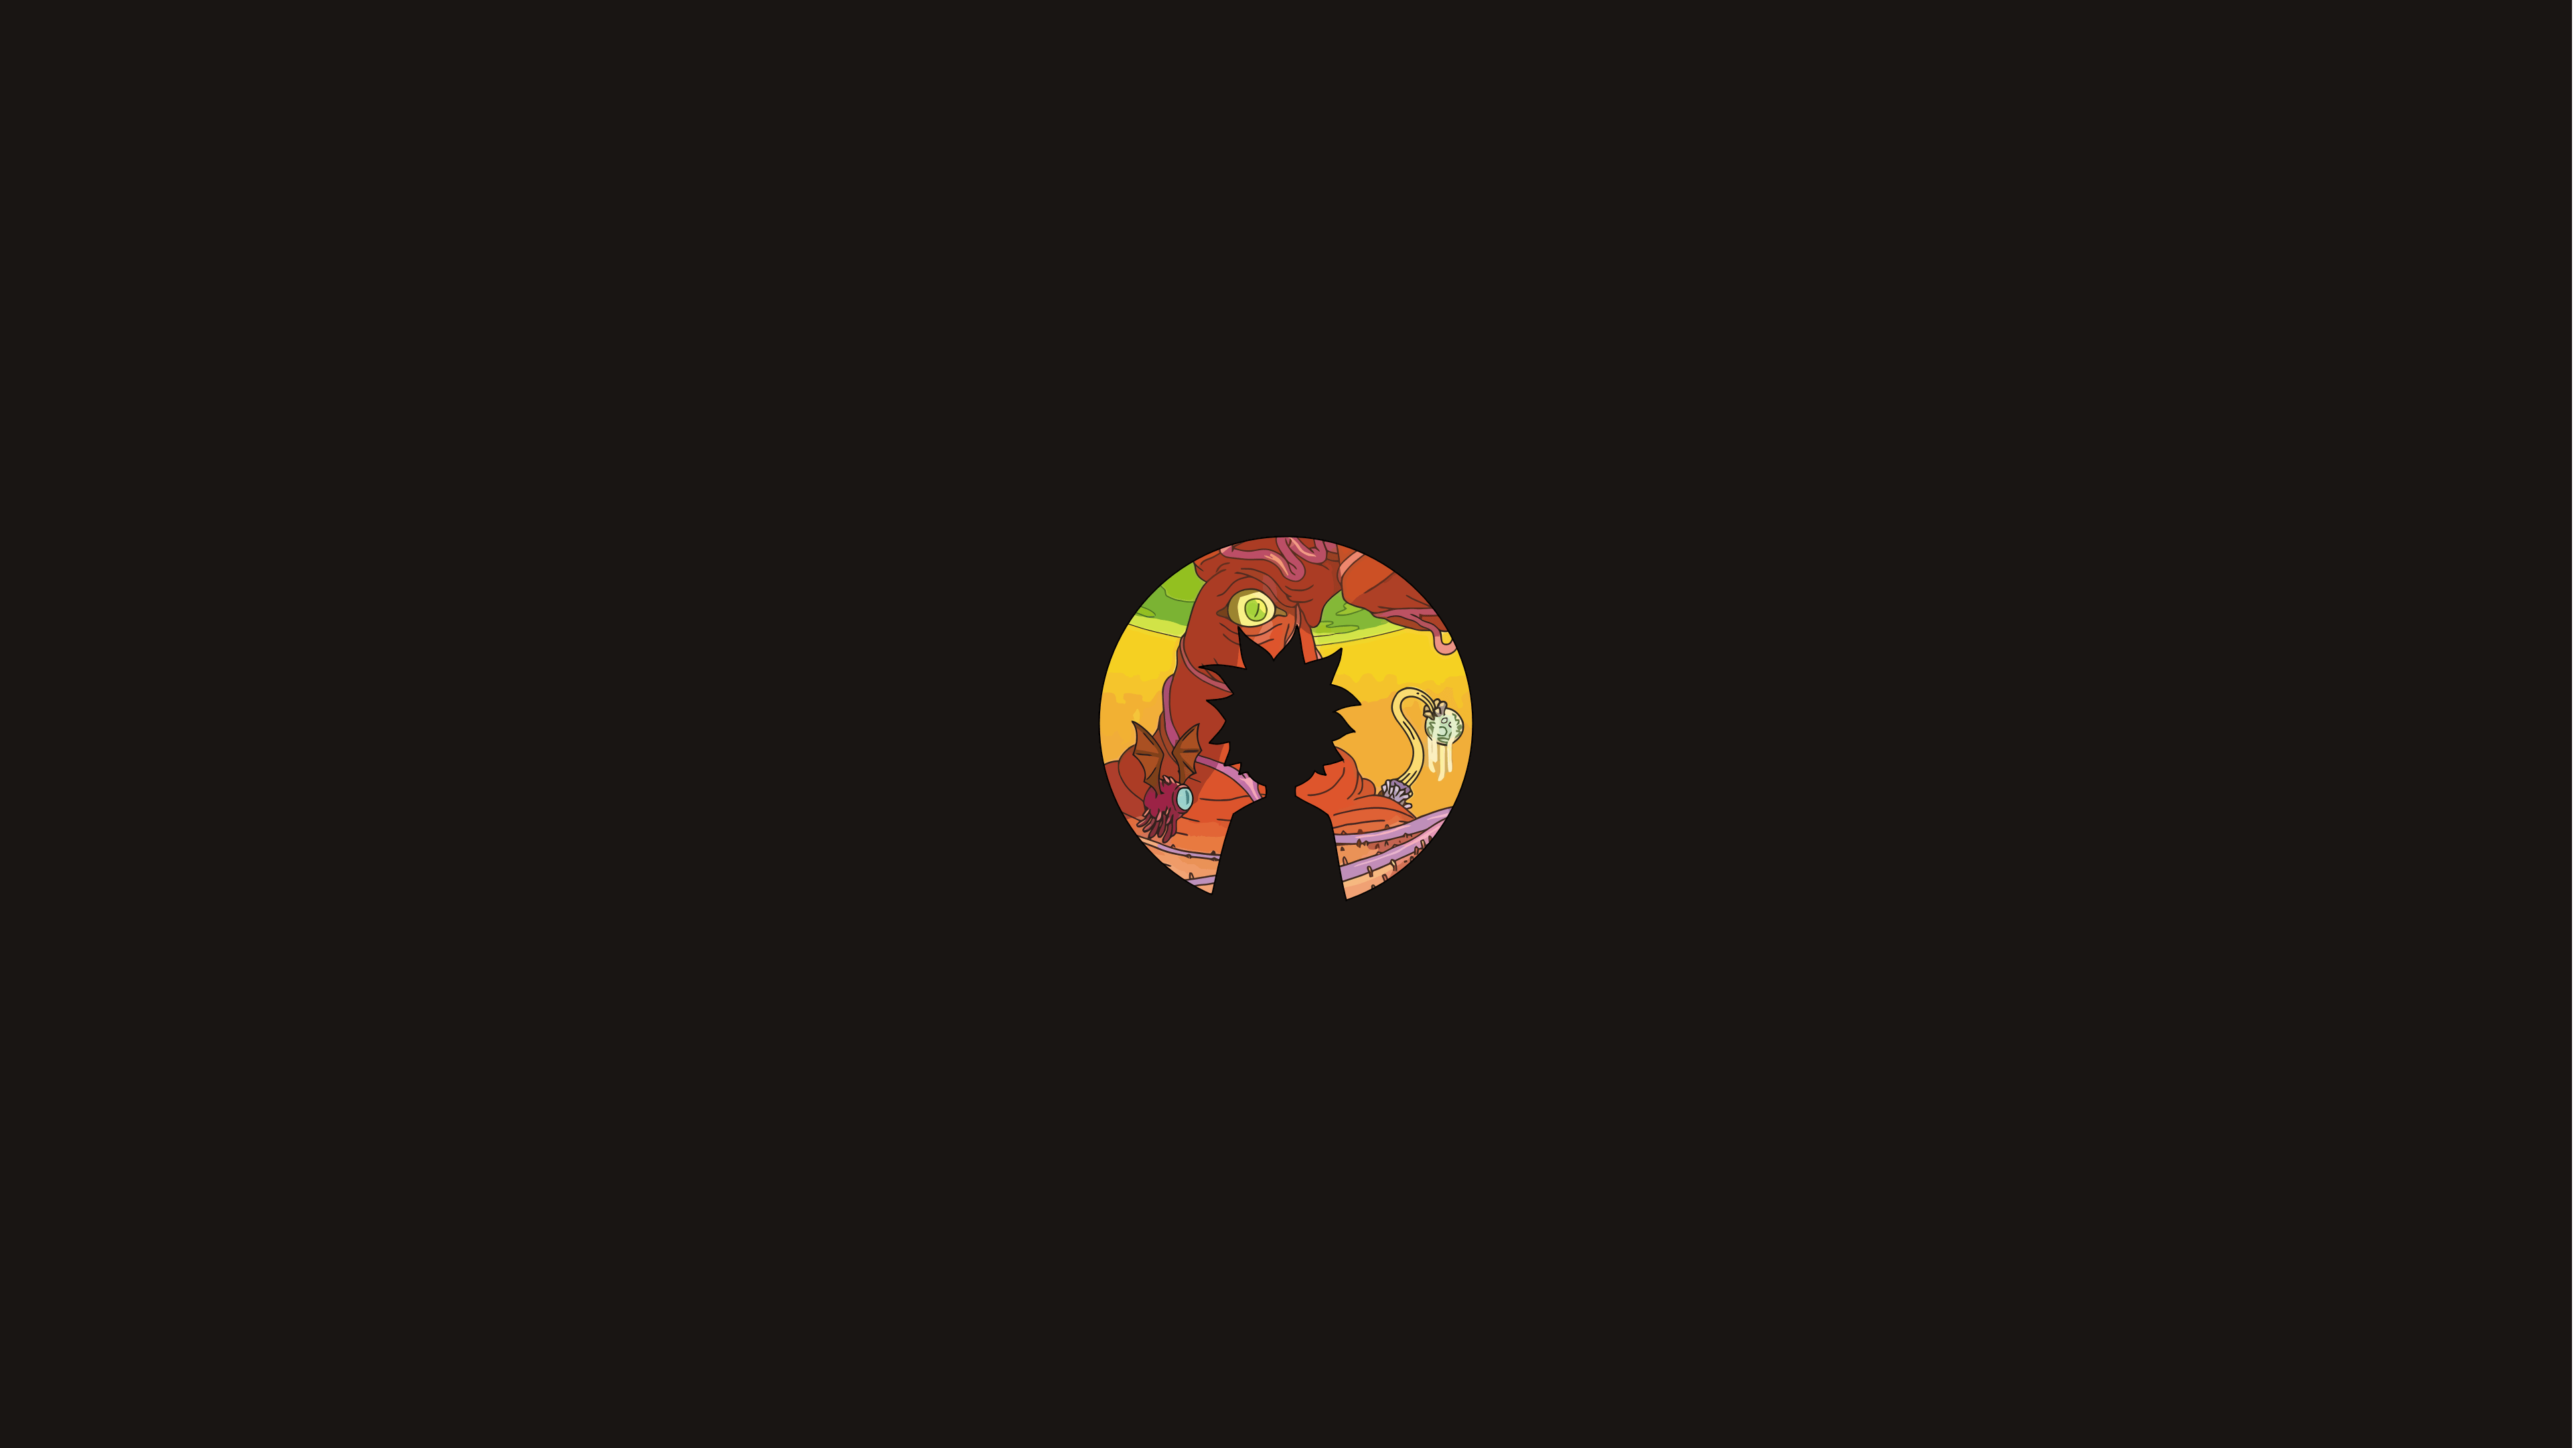 Some cool Rick and Morty wallpaper I made [OC]